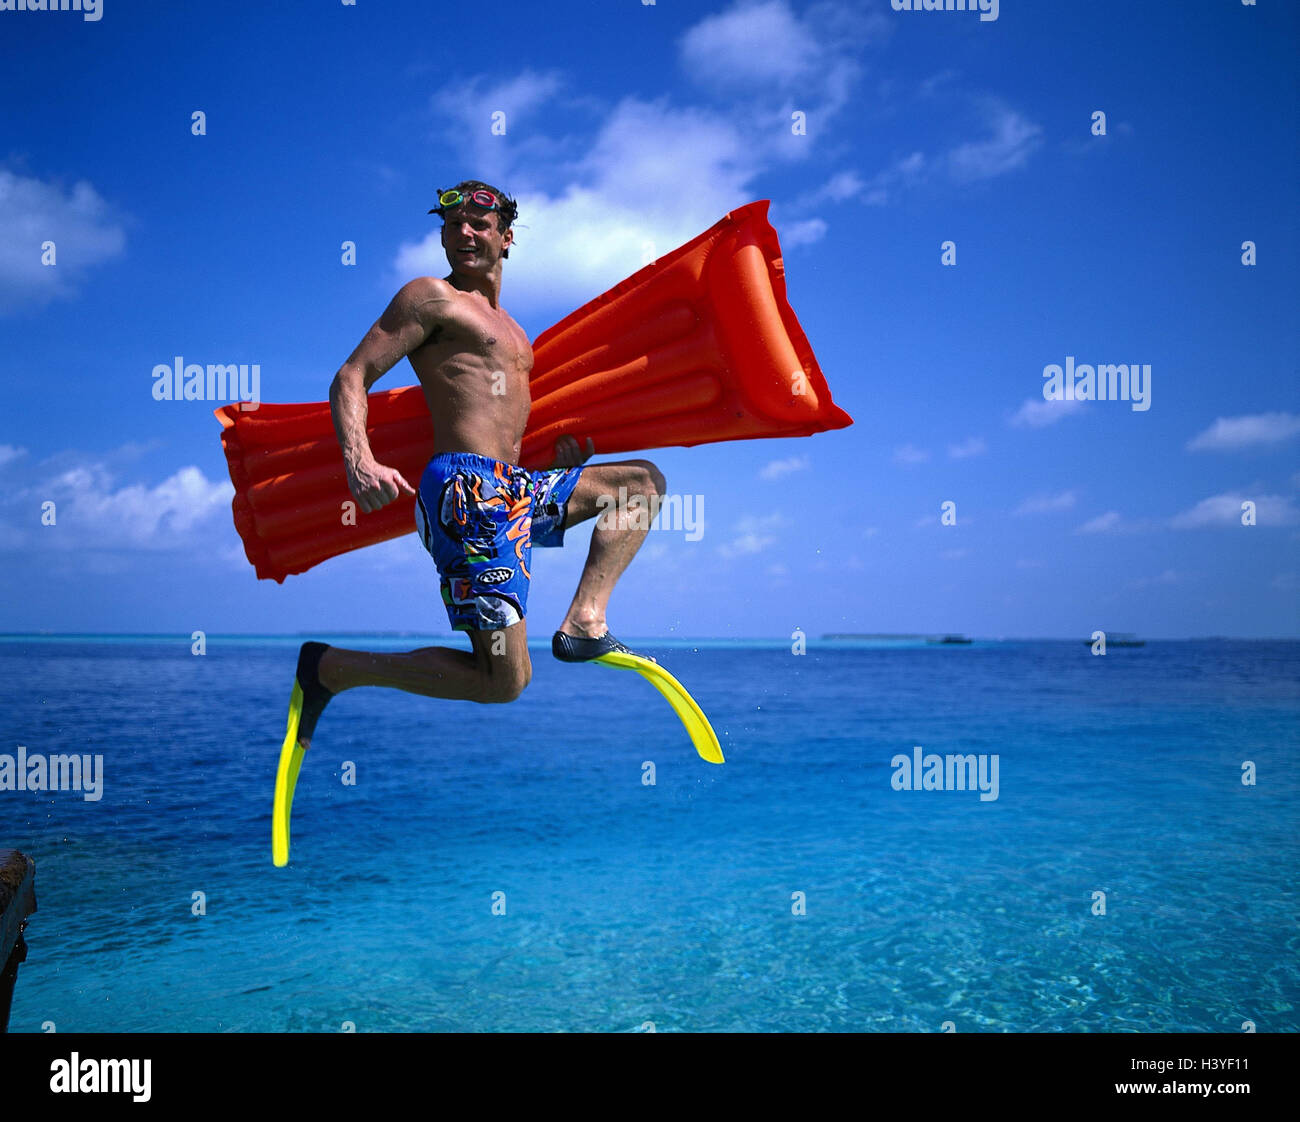 Sea, man, swimming fins, air bed, gesture, caper, outside, young, swimming trunks, snorkel equipment, jump, crack, happy, snorkel, leisure time, hobby, beach holiday, vacation, rest, joy, water Stock Photo